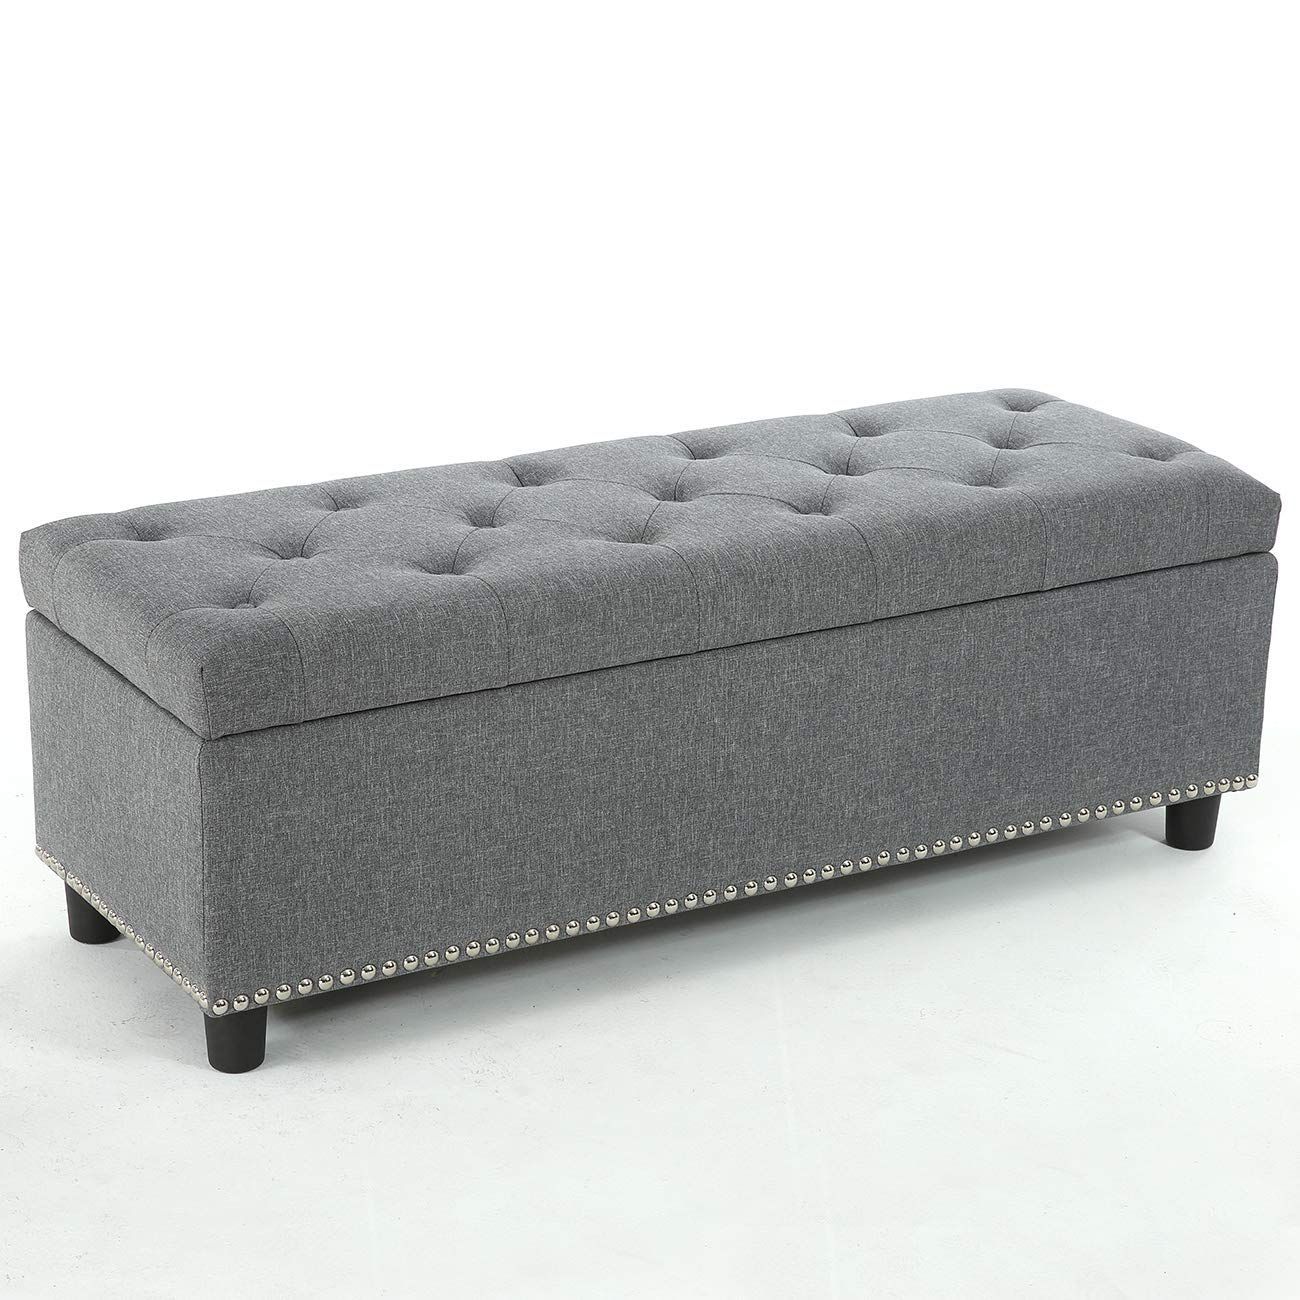 Rectangular Gray Storage Fabric Ottoman Bench Tufted Footrest Lift Top With Regard To Fabric Tufted Storage Ottomans (View 5 of 20)